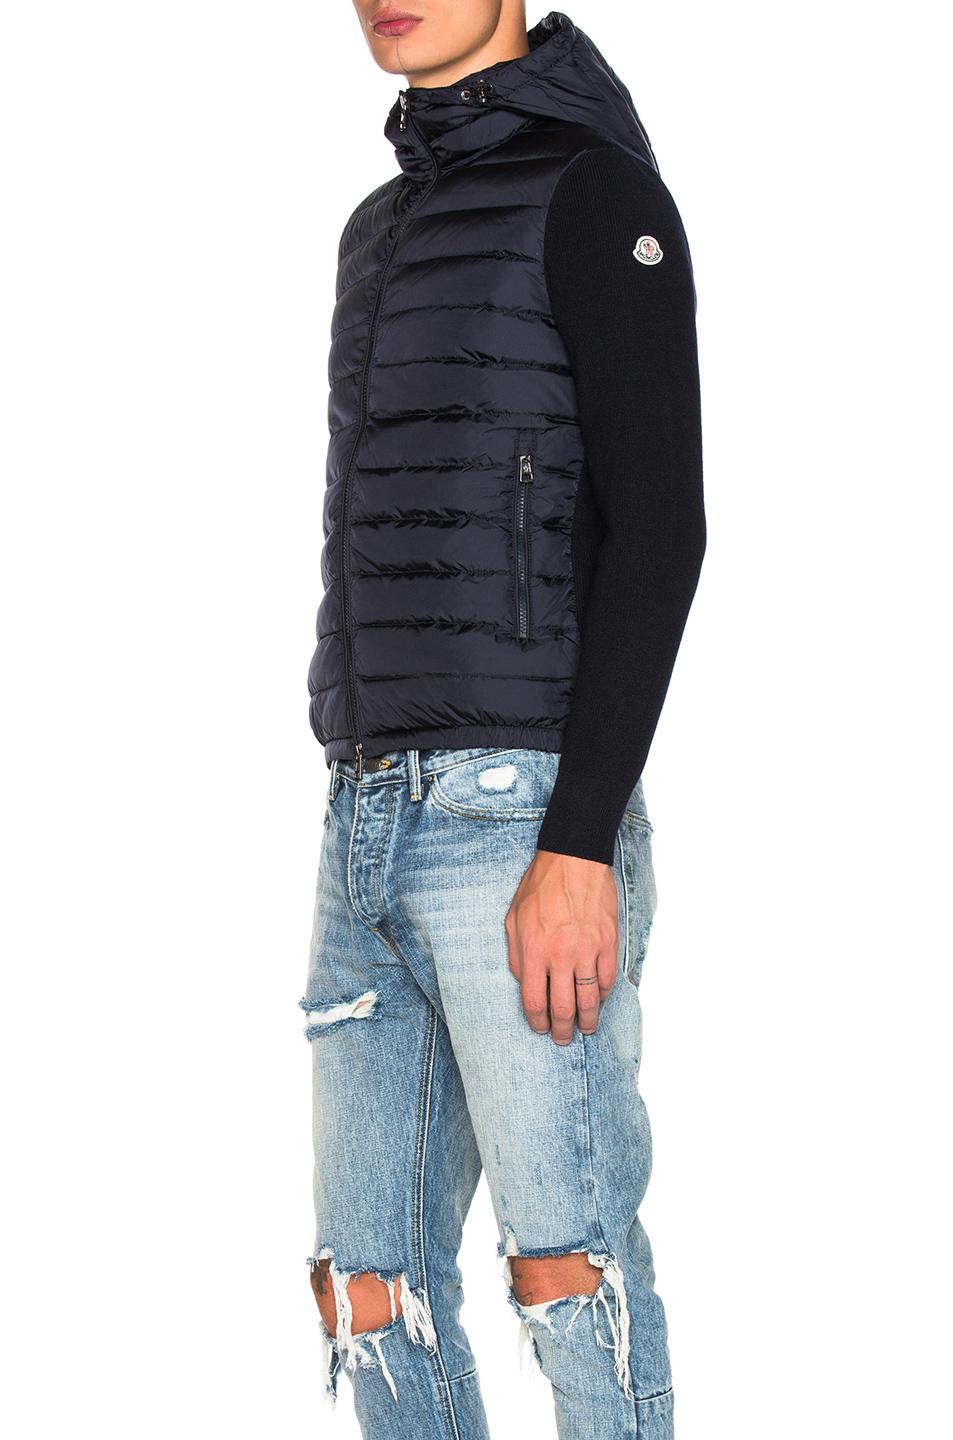 Moncler Synthetic Maglione Tricot Cardigan in Navy (Blue) - Lyst